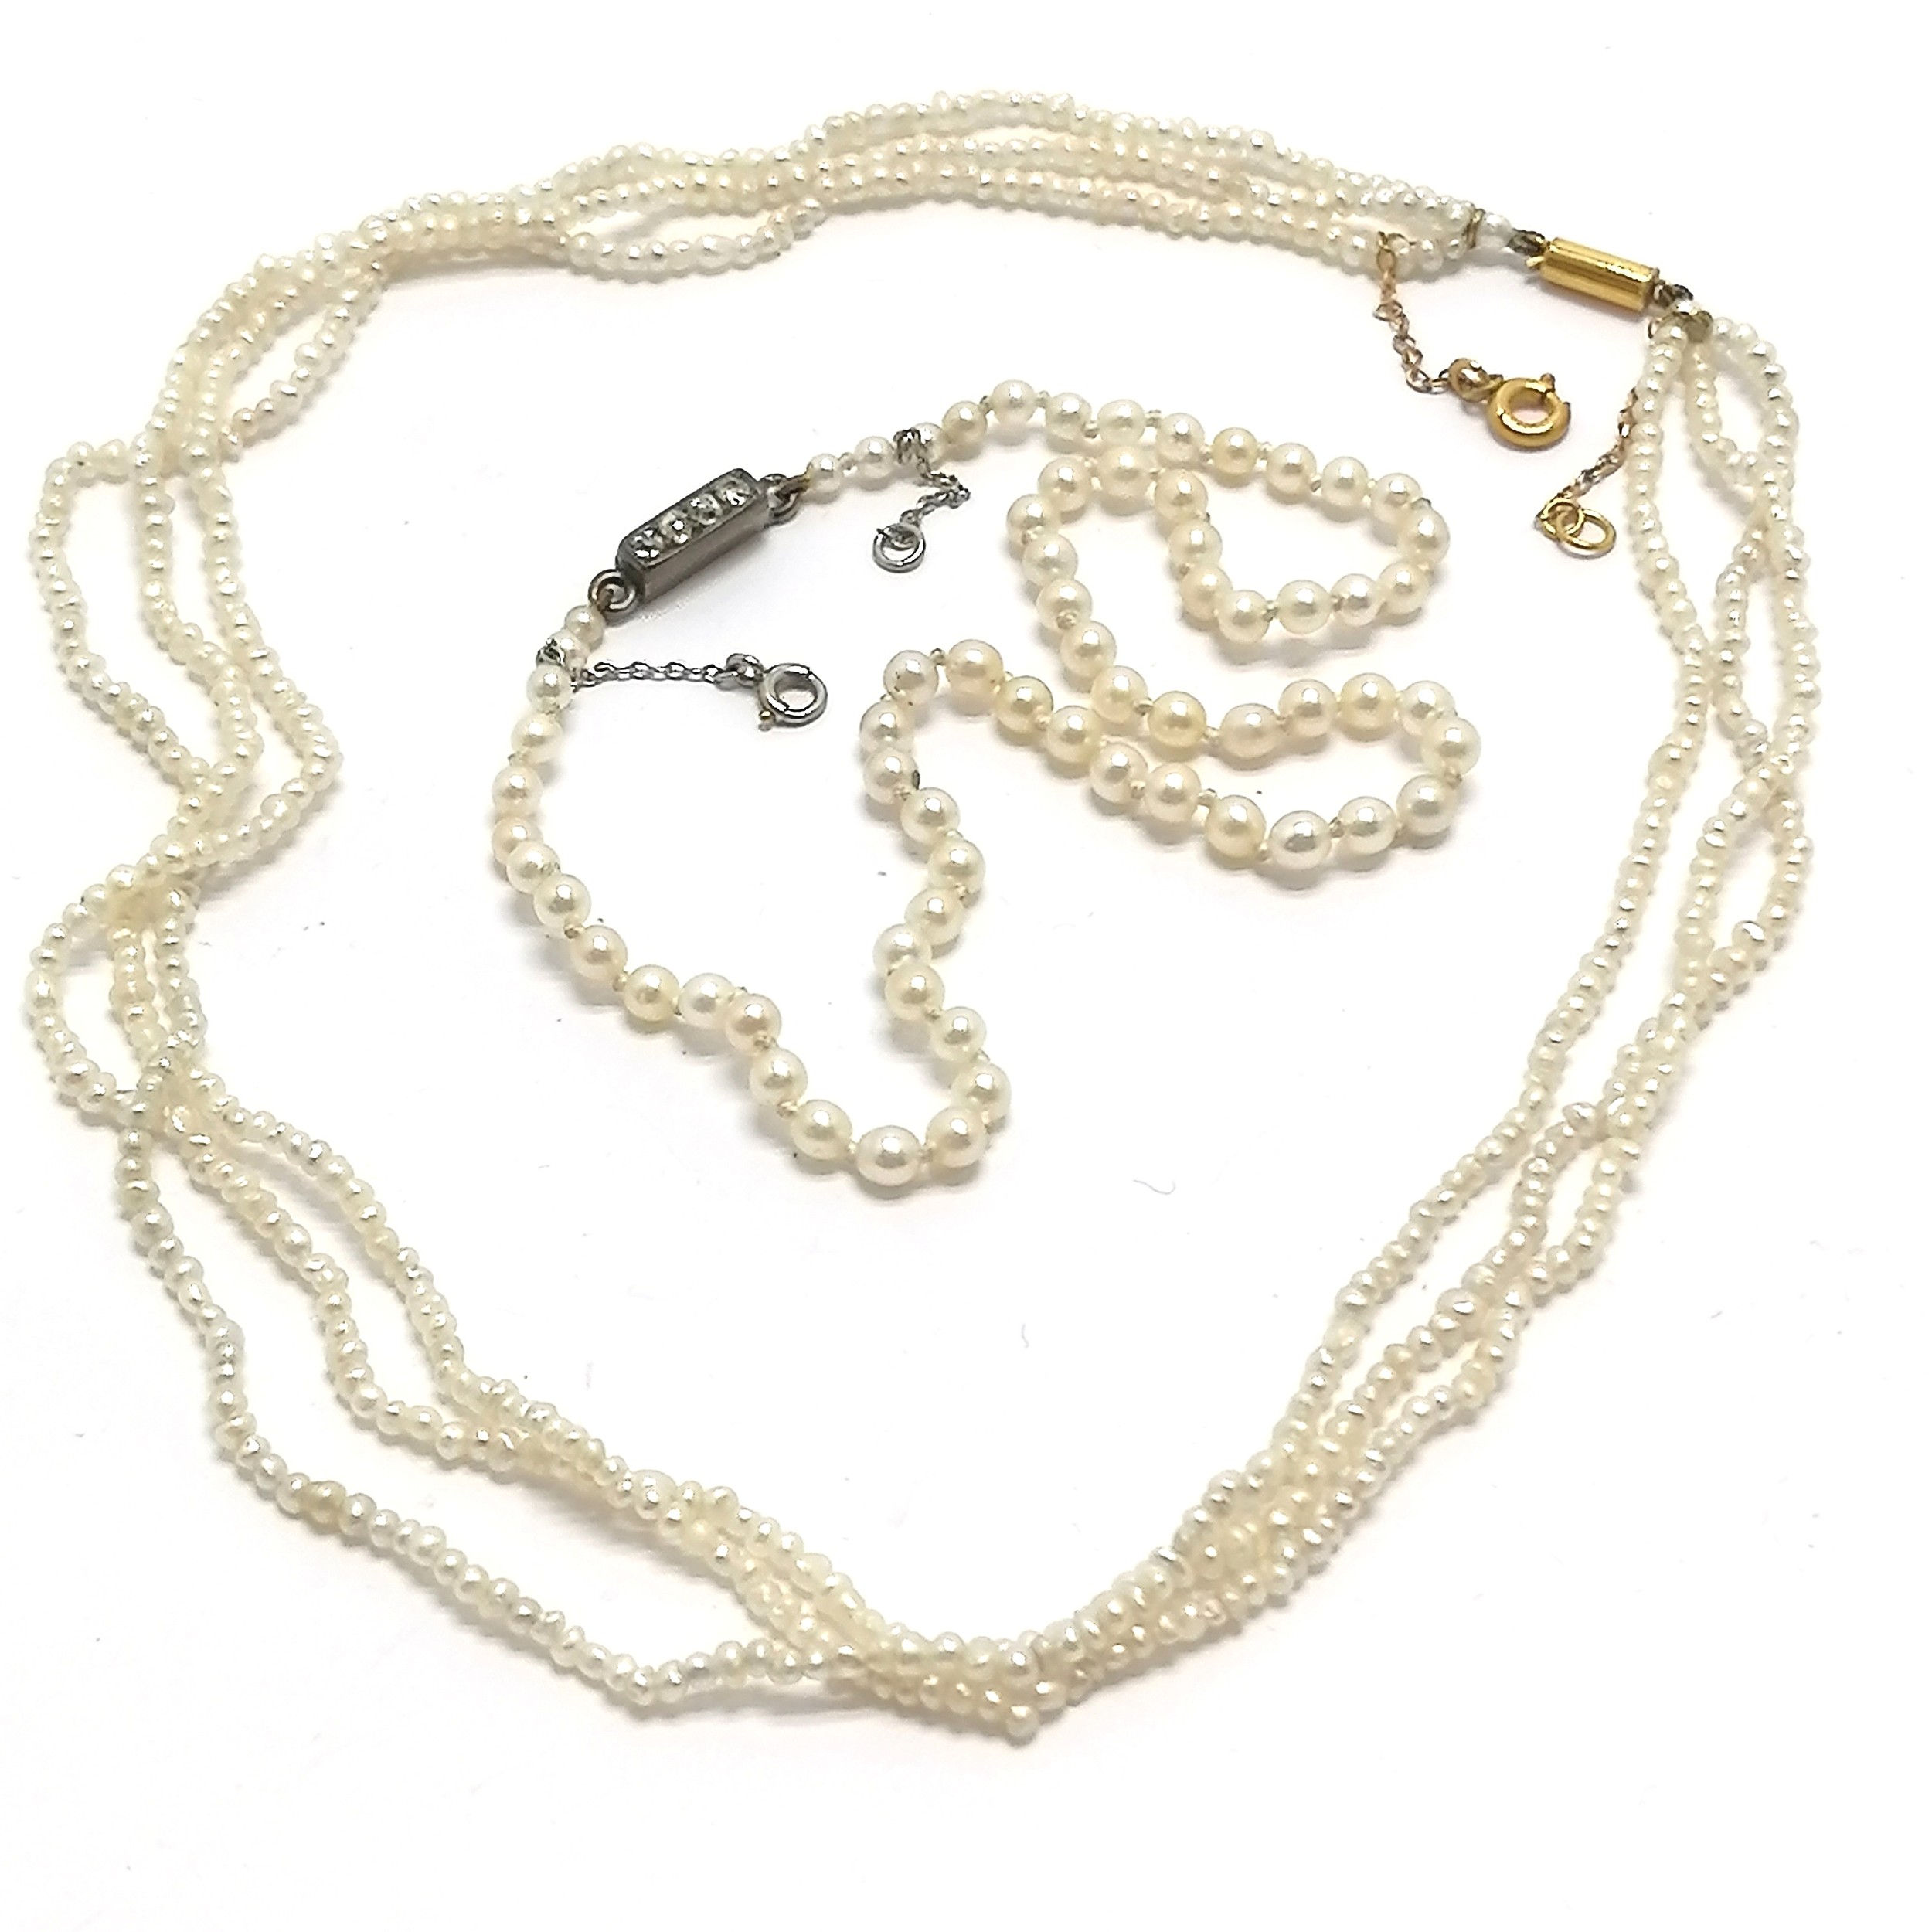 Antique triple strand of seed pearls with gold clasp (32cm) t/w pearl bracelet - SOLD ON BEHALF OF